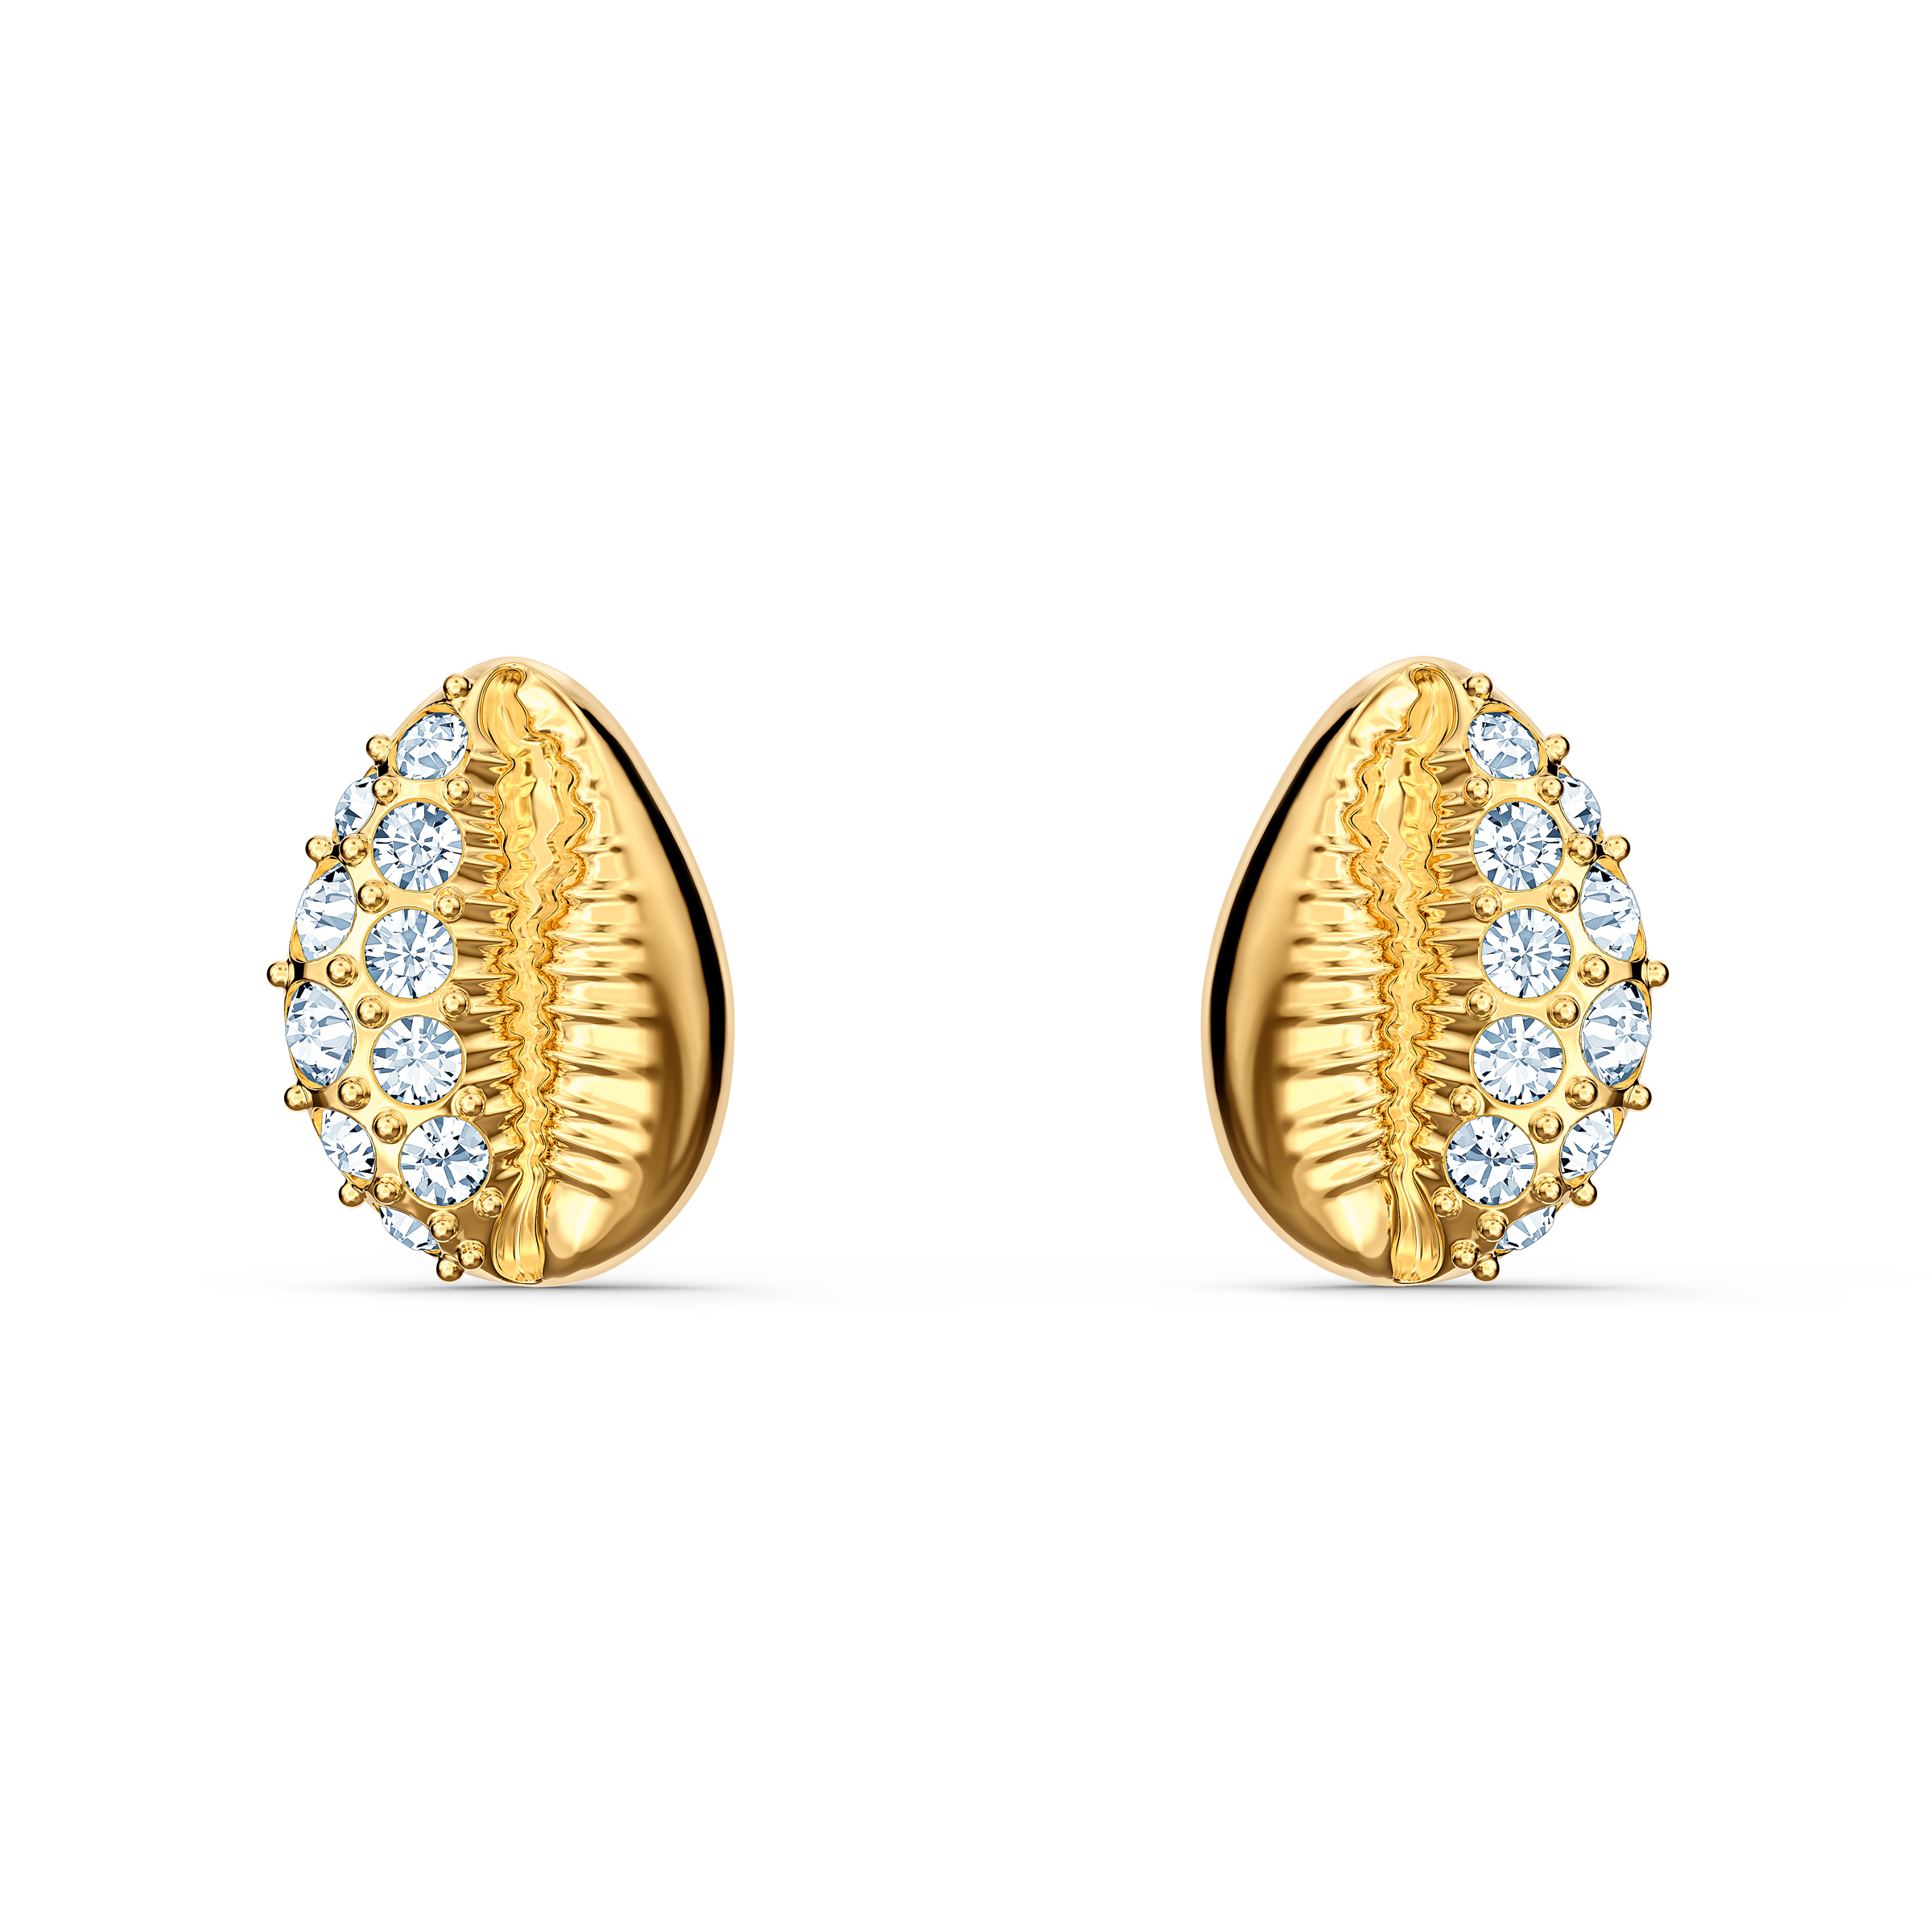 Dazzling gold shell stud earrings with Swarovski crystals.